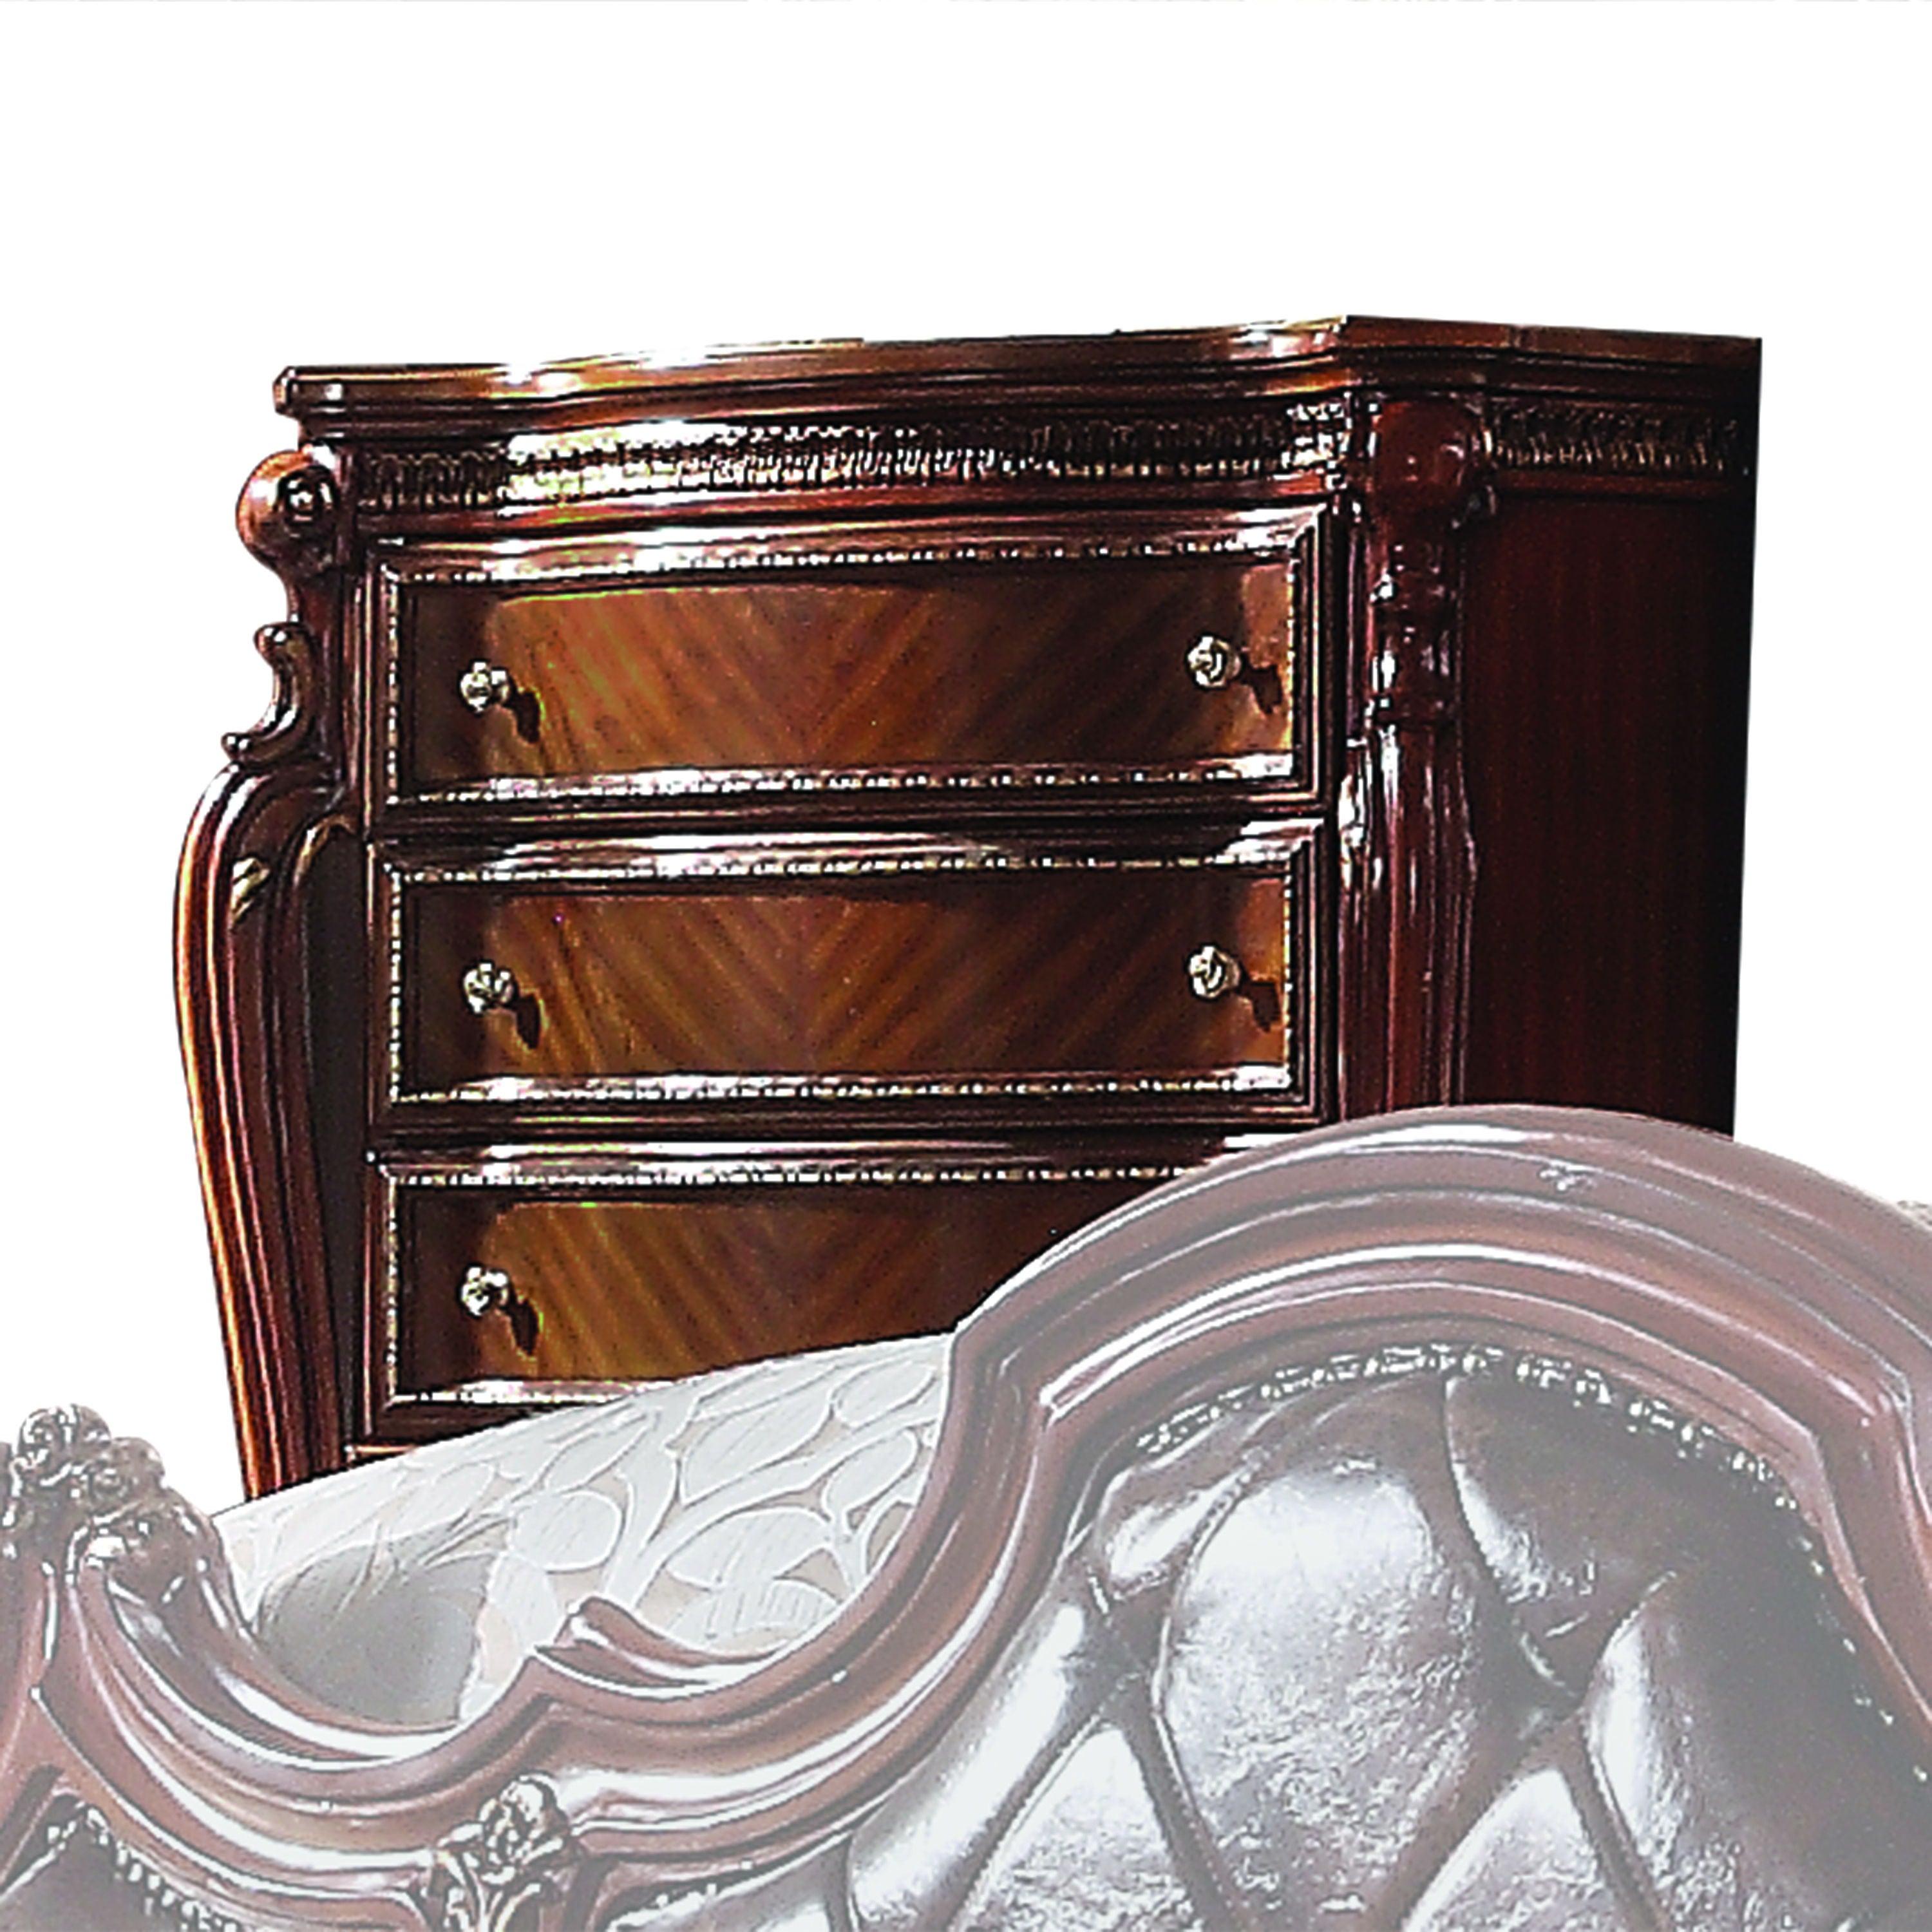 ACME - Picardy - Chest - 5th Avenue Furniture